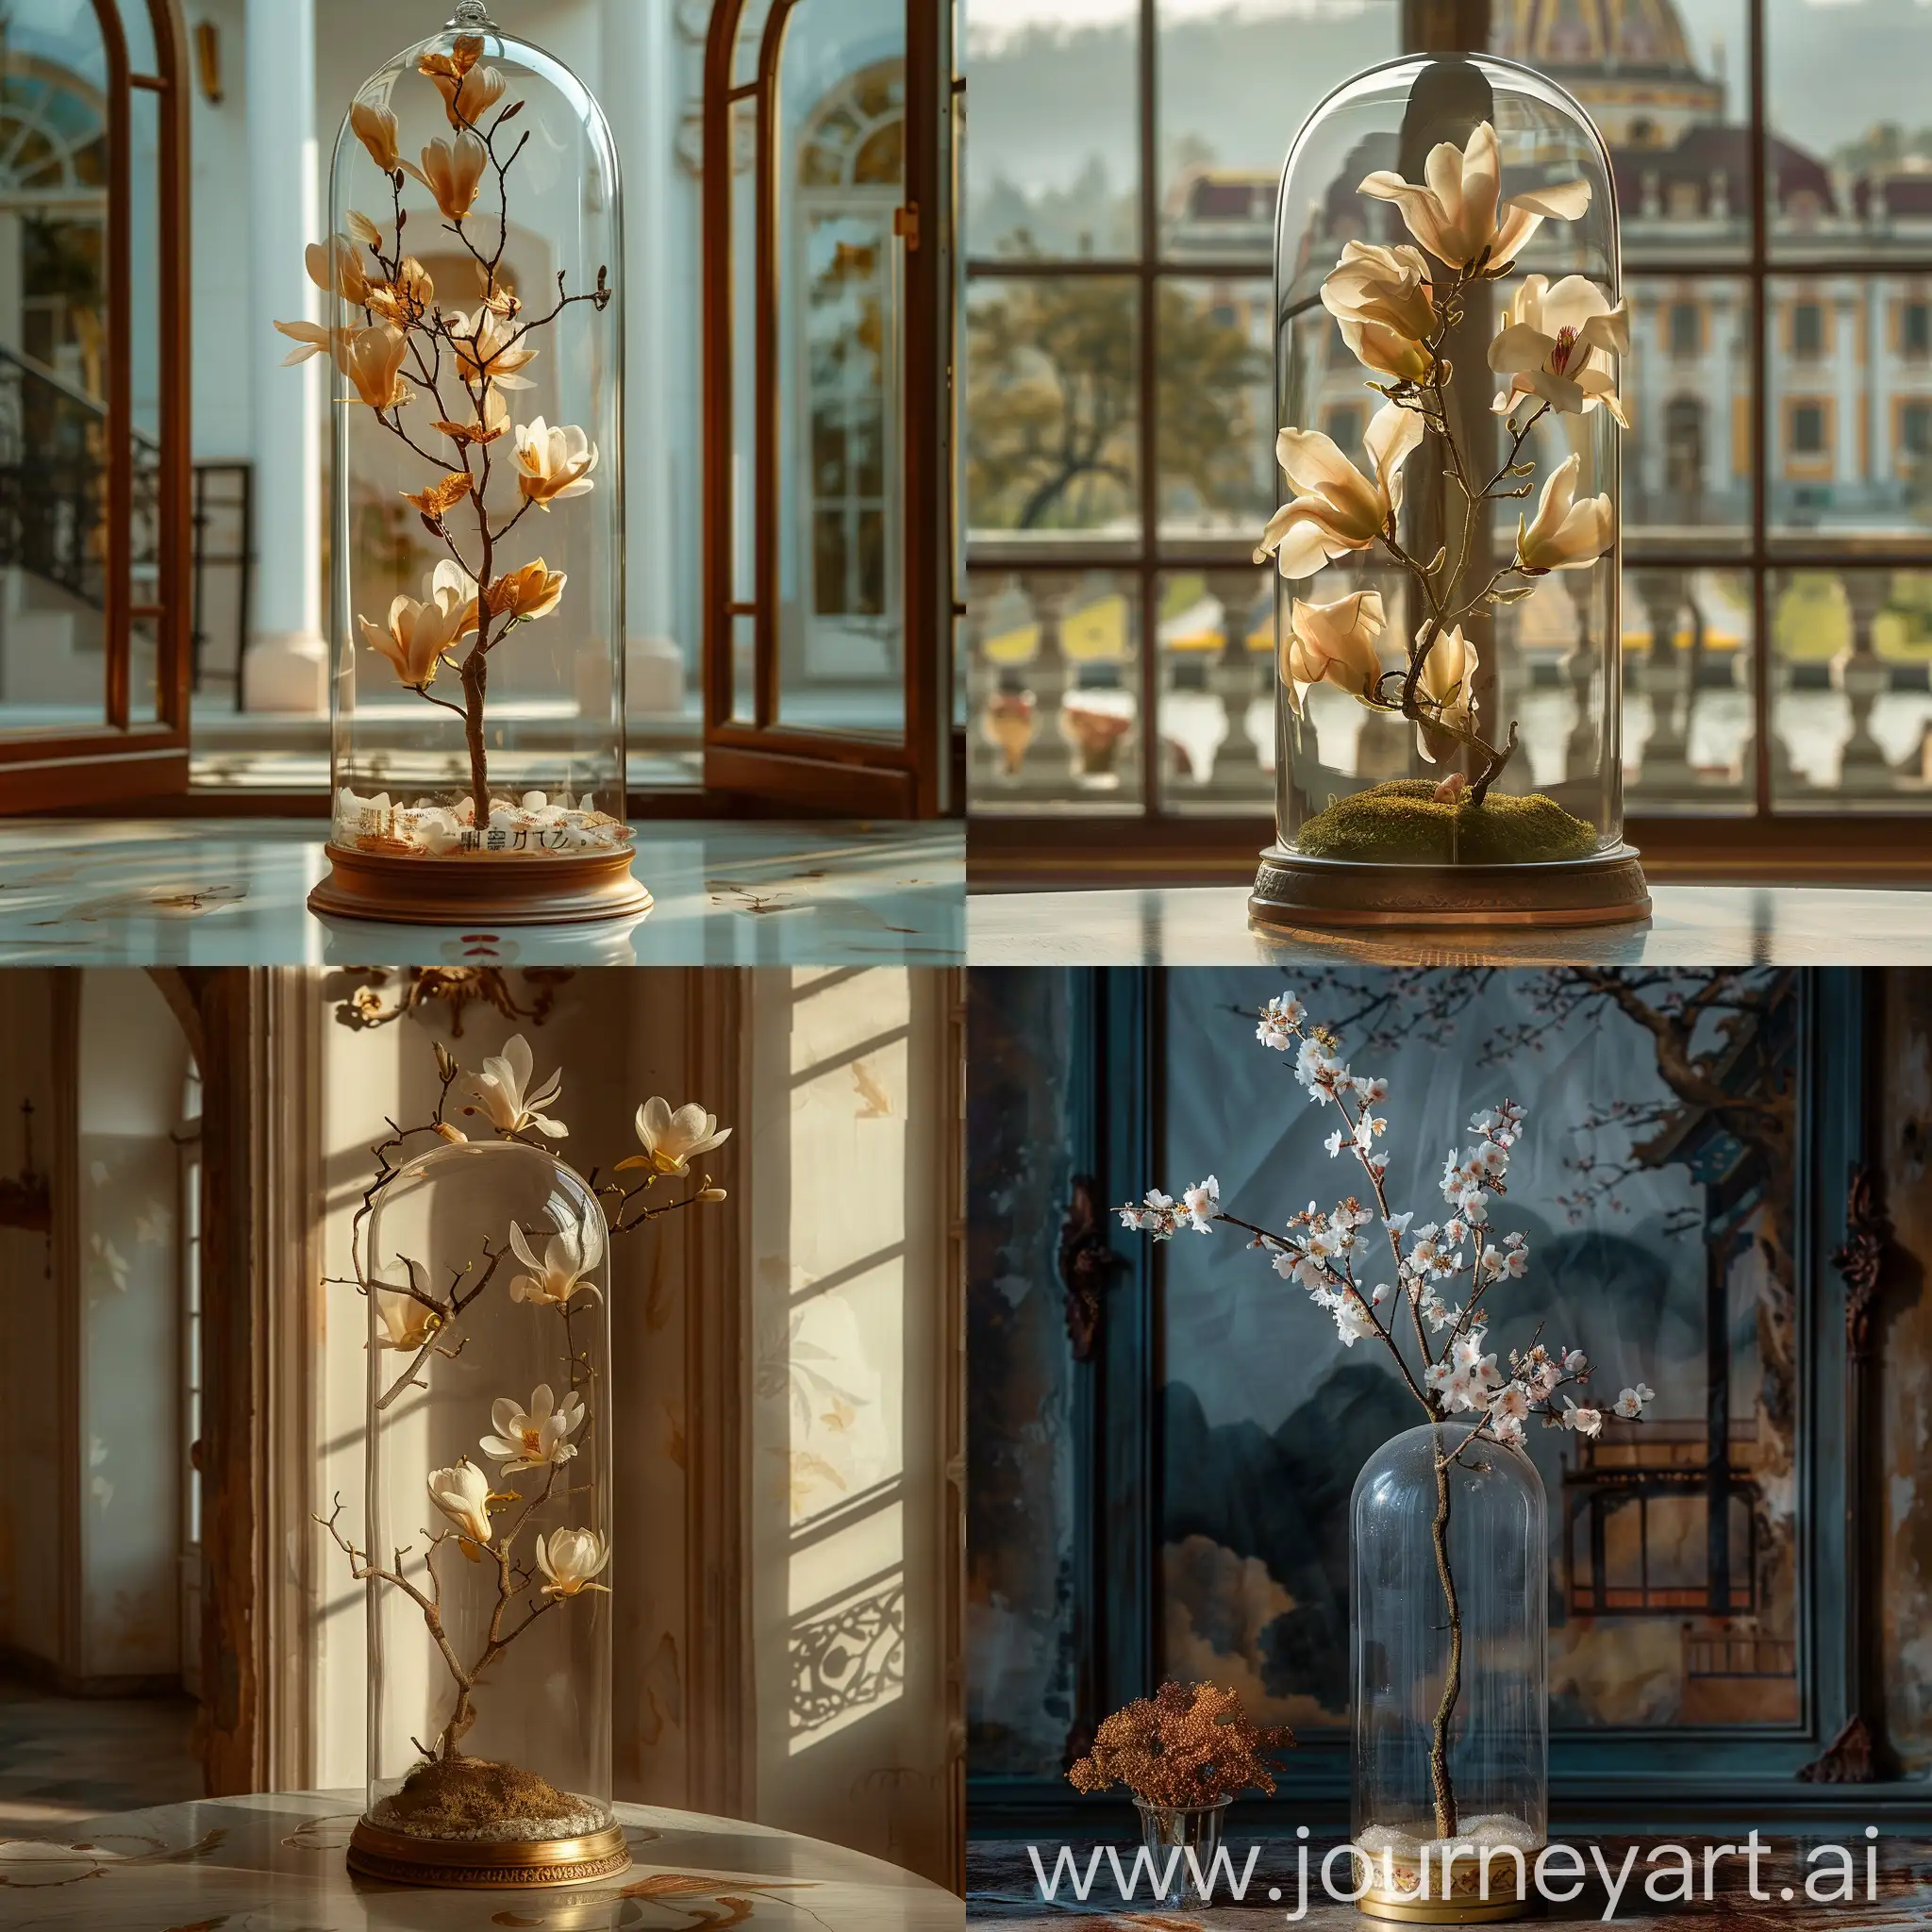 Exquisite-Flower-Branch-in-Glass-Dome-Elegant-Morning-Scene-at-Royal-House